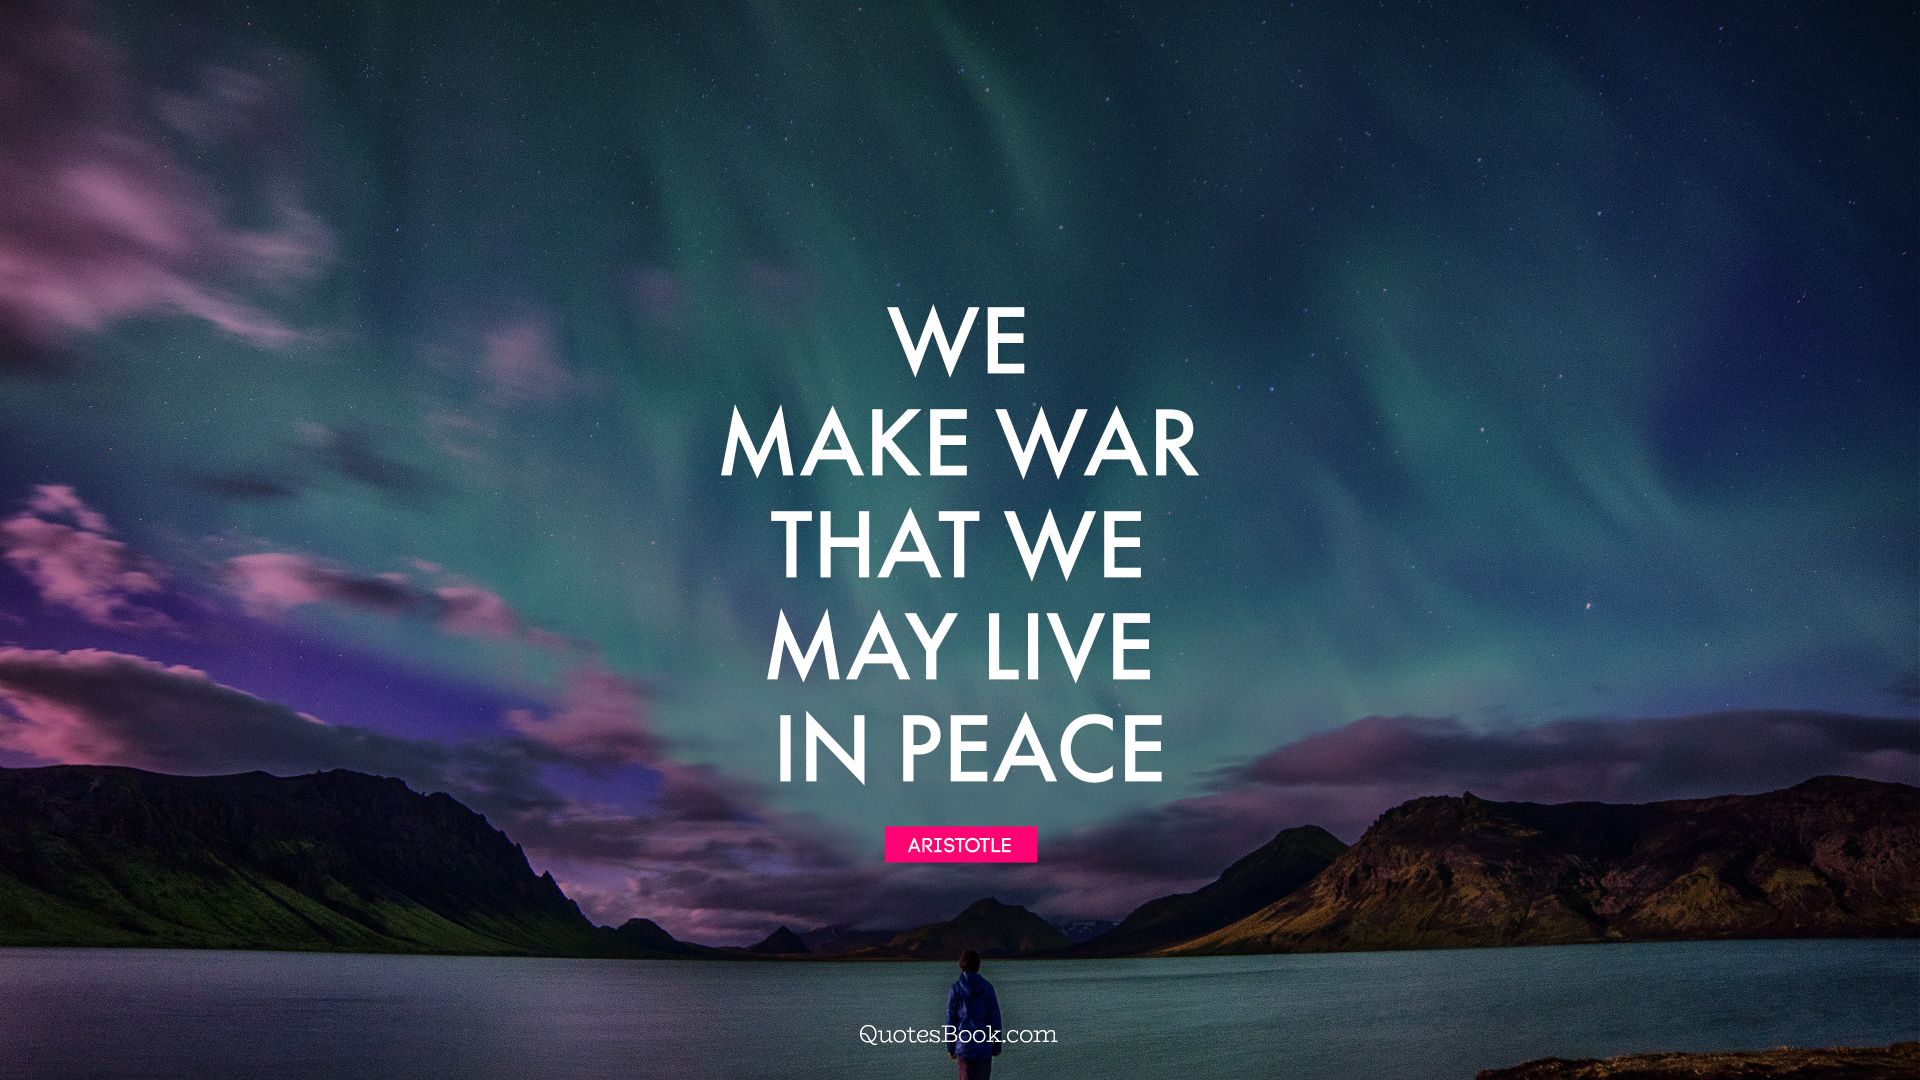 We make war that we may live in peace. - Quote by Aristotle